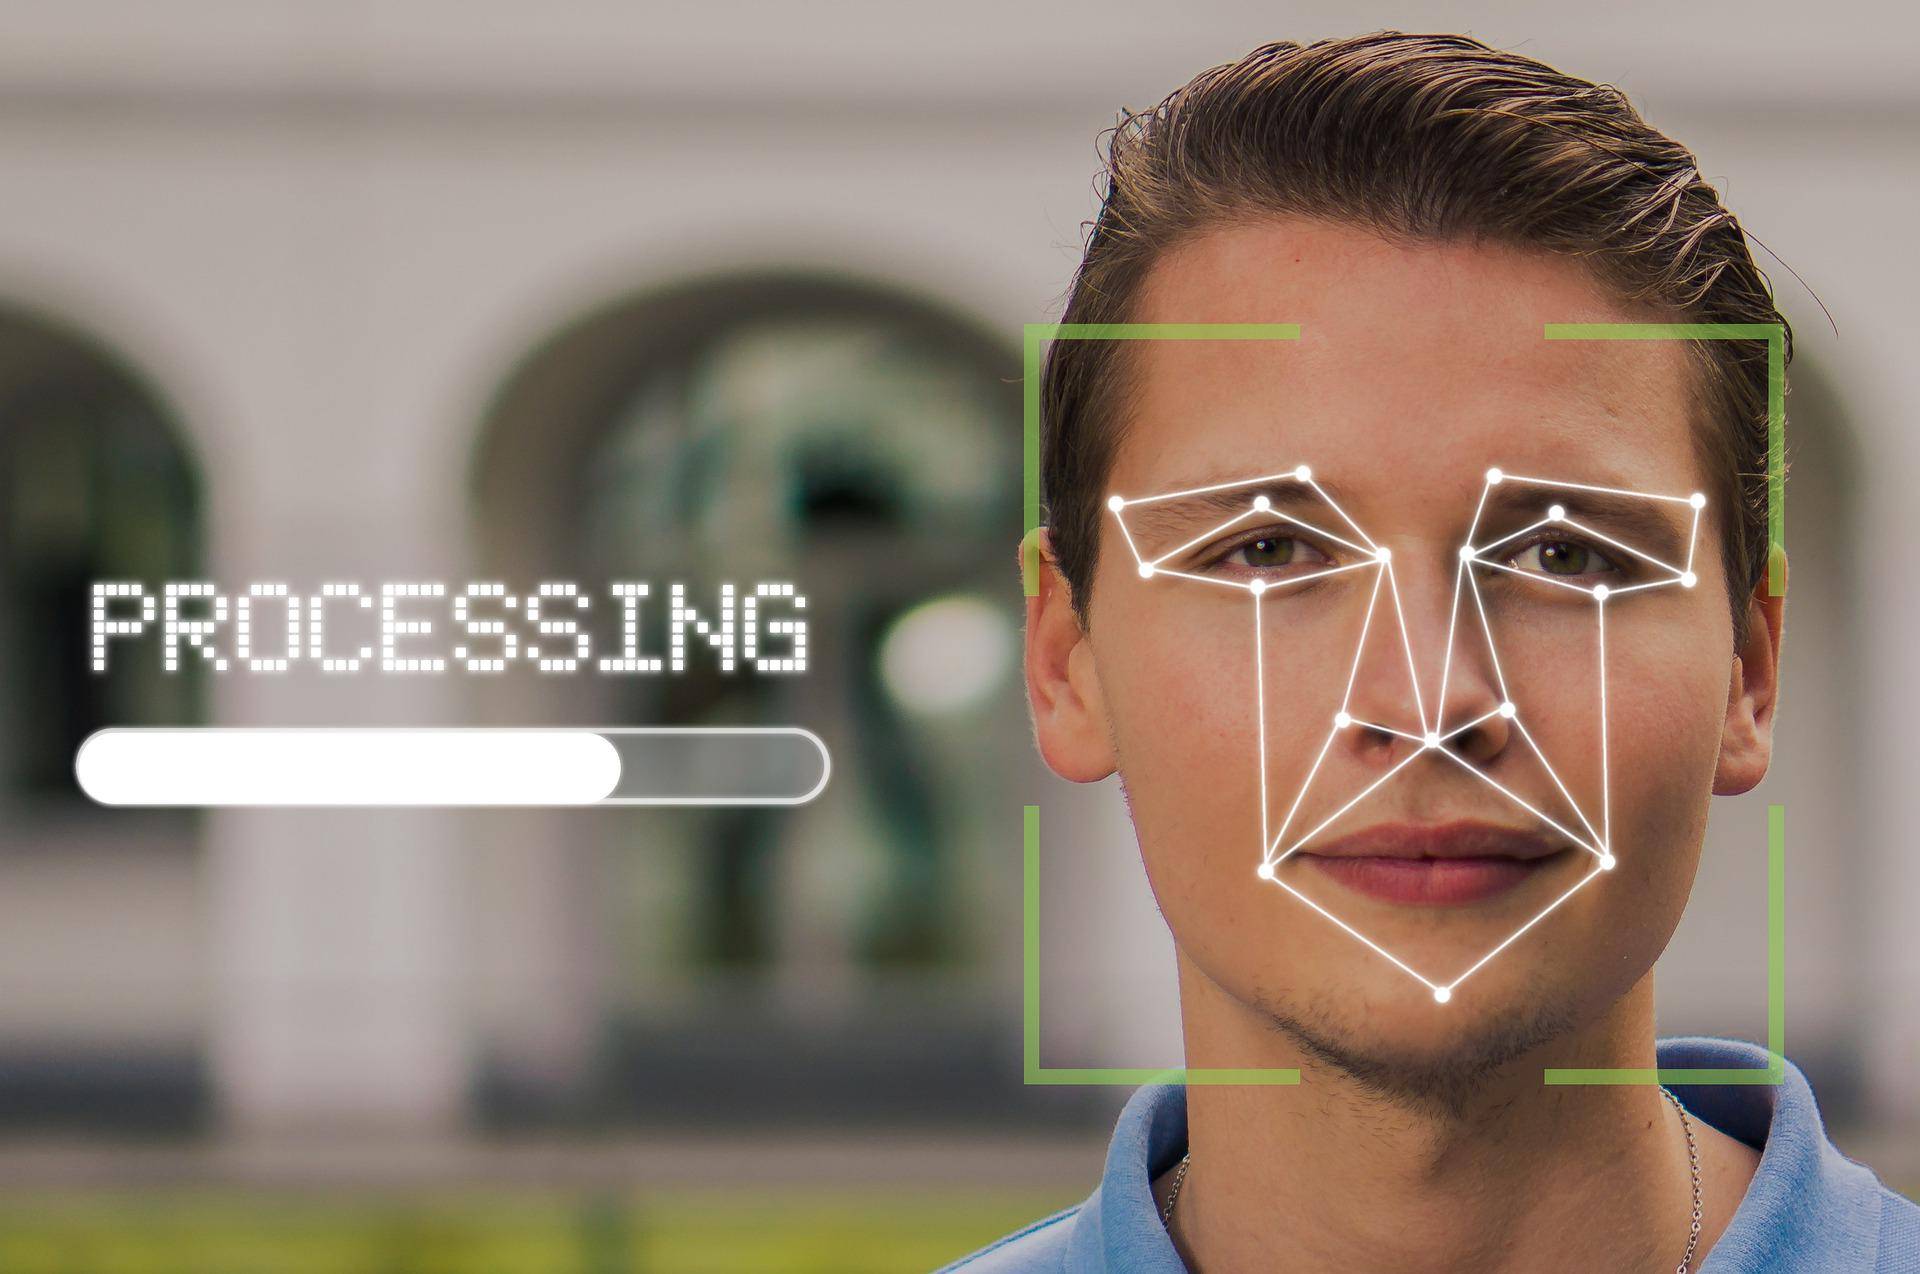 A man's face with facial recognition technology with the word "Processing"